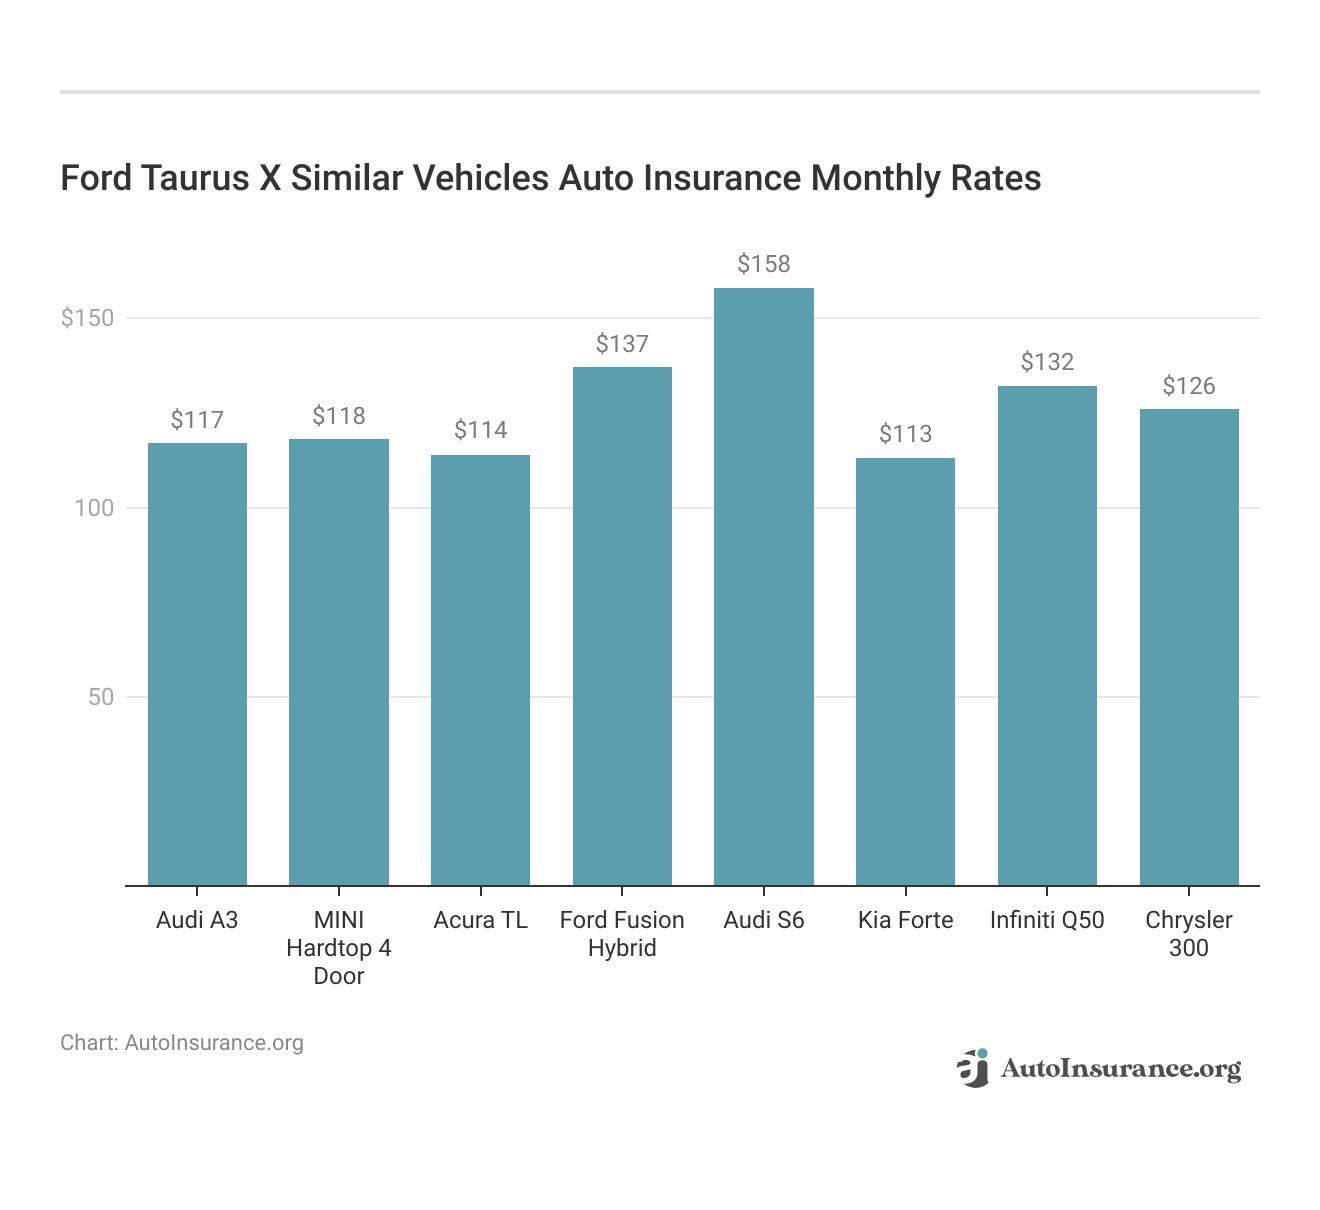 <h3>Ford Taurus X Similar Vehicles Auto Insurance Monthly Rates</h3>